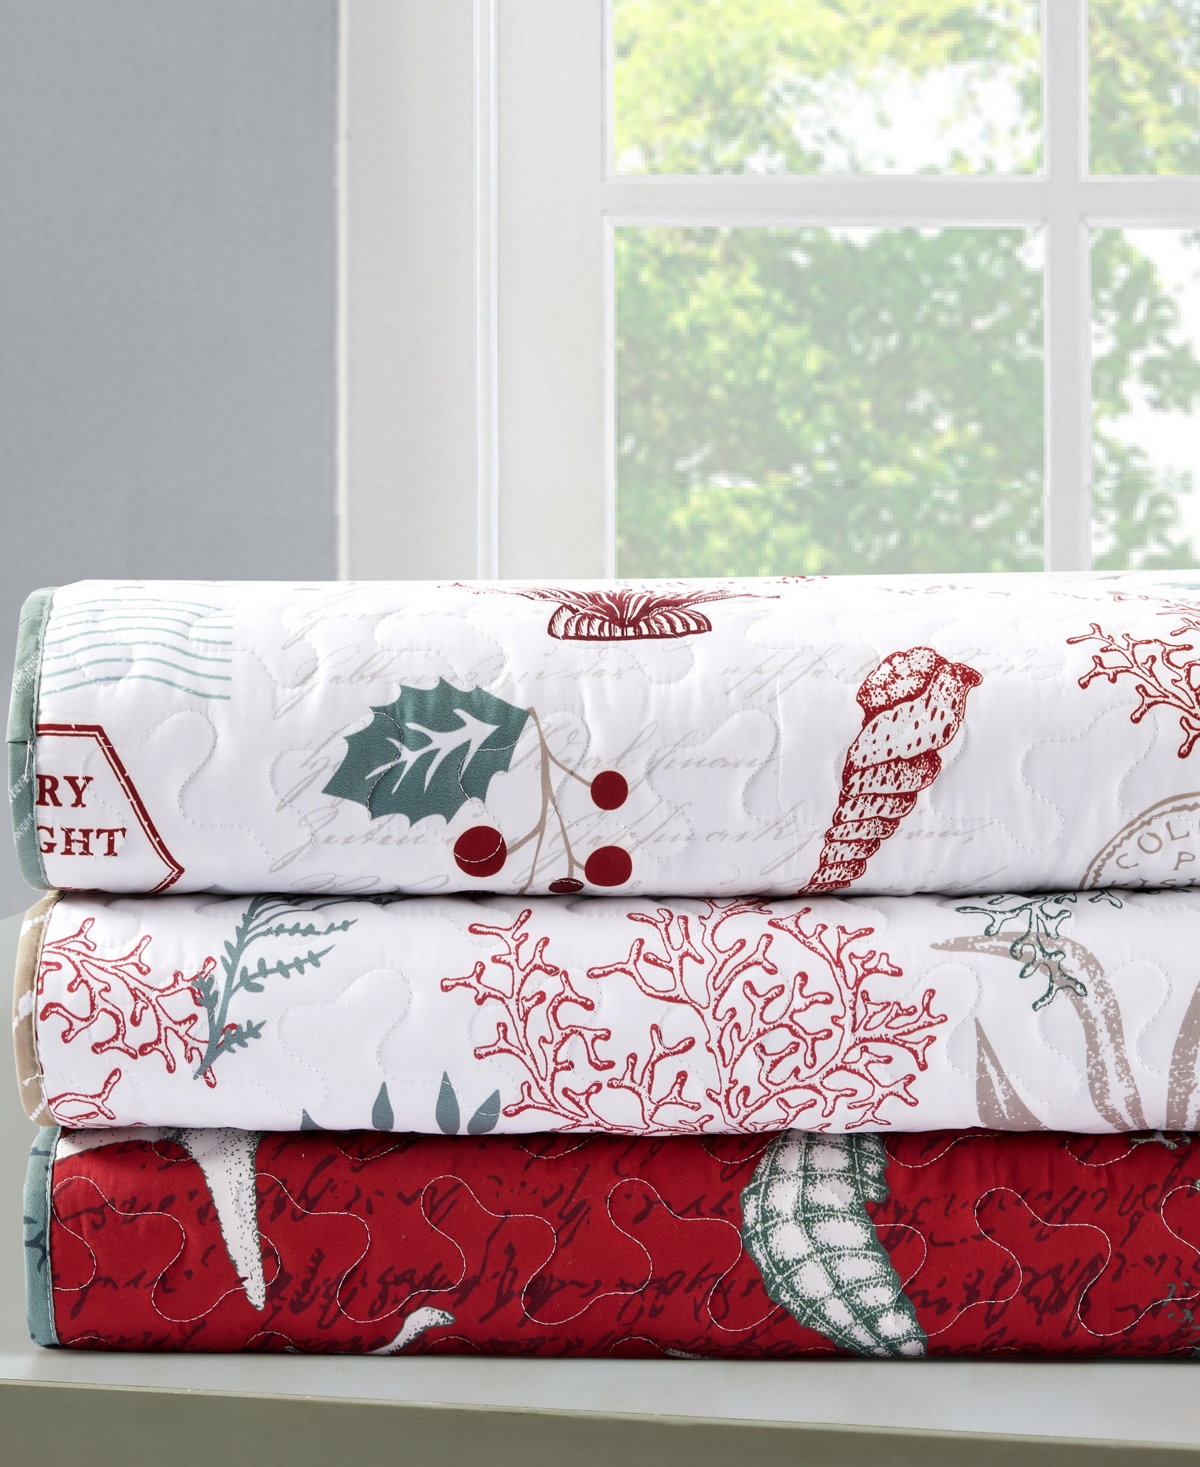 Shop Videri Home Festive Seahorse Reversible 3-piece Quilt Set, King In Red Multi